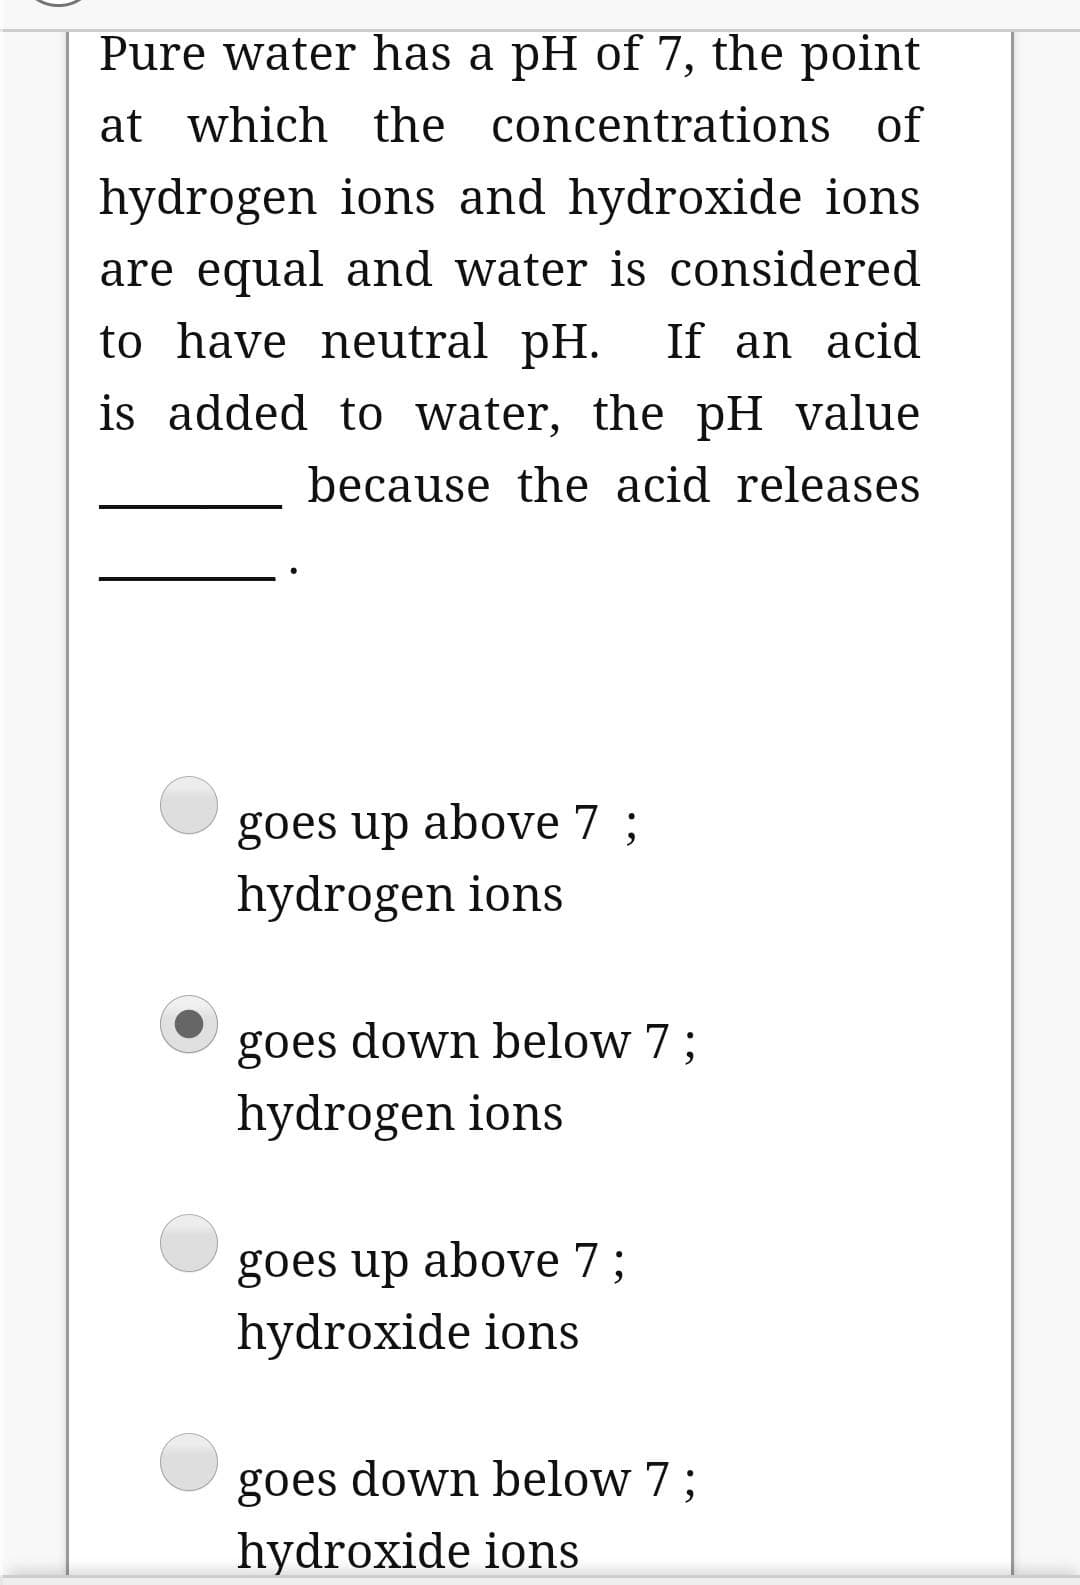 Pure water has a pH of 7, the point
at which the concentrations of
hydrogen ions and hydroxide ions
are equal and water is considered
to have neutral pH. If an acid
is added to water, the pH value
because the acid releases
goes up above 7 ;
hydrogen ions
goes down below 7;
hydrogen ions
goes up above 7;
hydroxide ions
goes down below 7 ;
hydroxide ions
